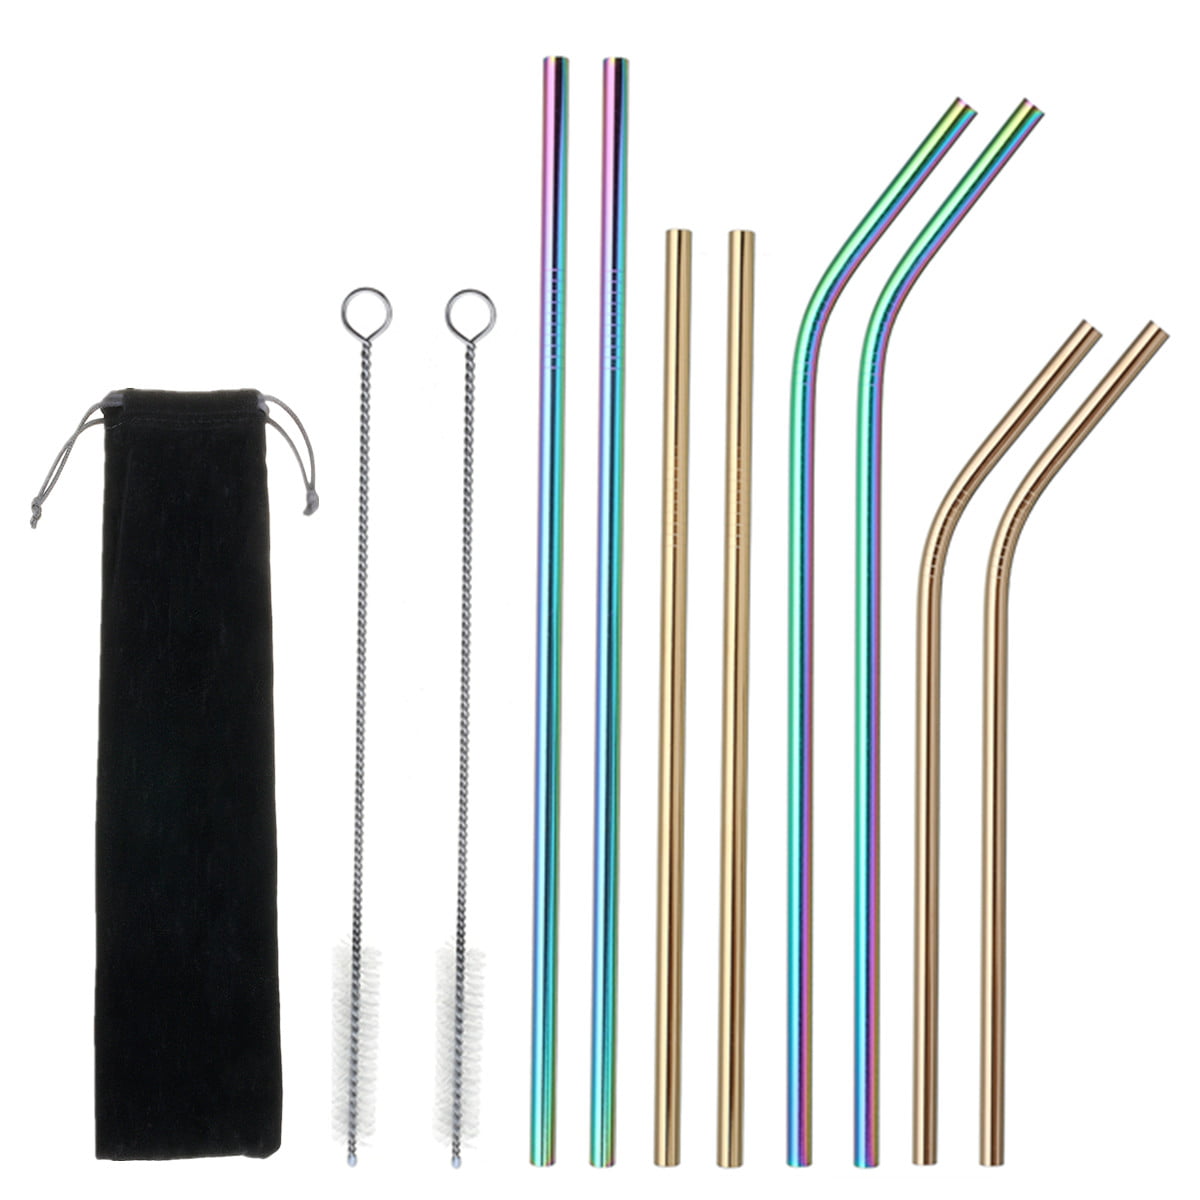 8x Stainless Steel Metal Rainbow Extra Long 26cm Drinking Straws Brush Pouch